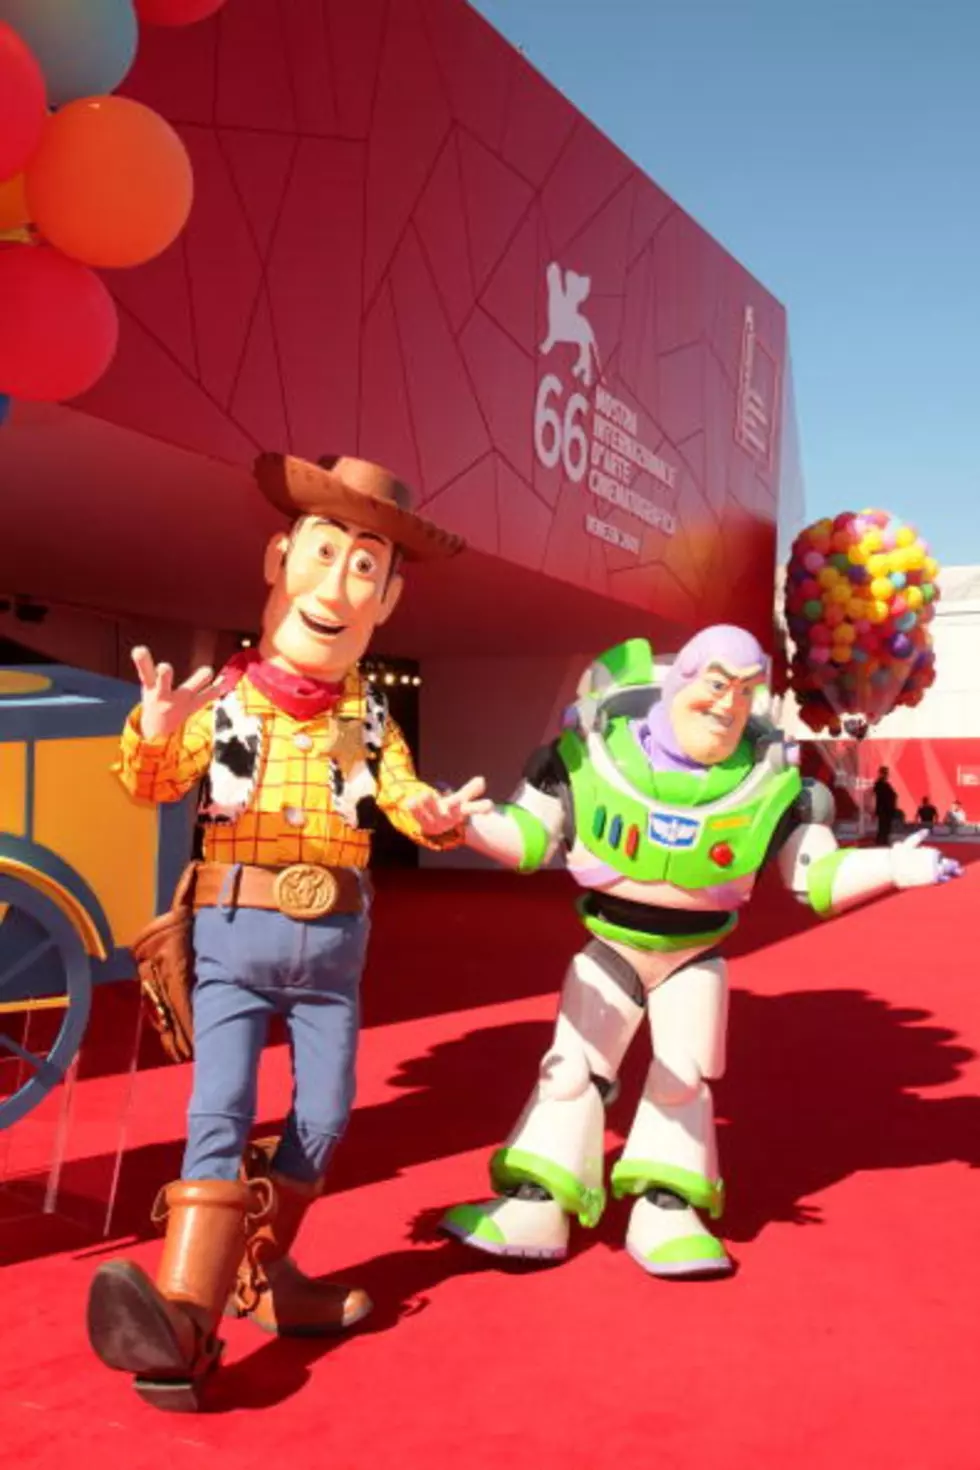 Toy Story 4 Will Be a Romantic Comedy